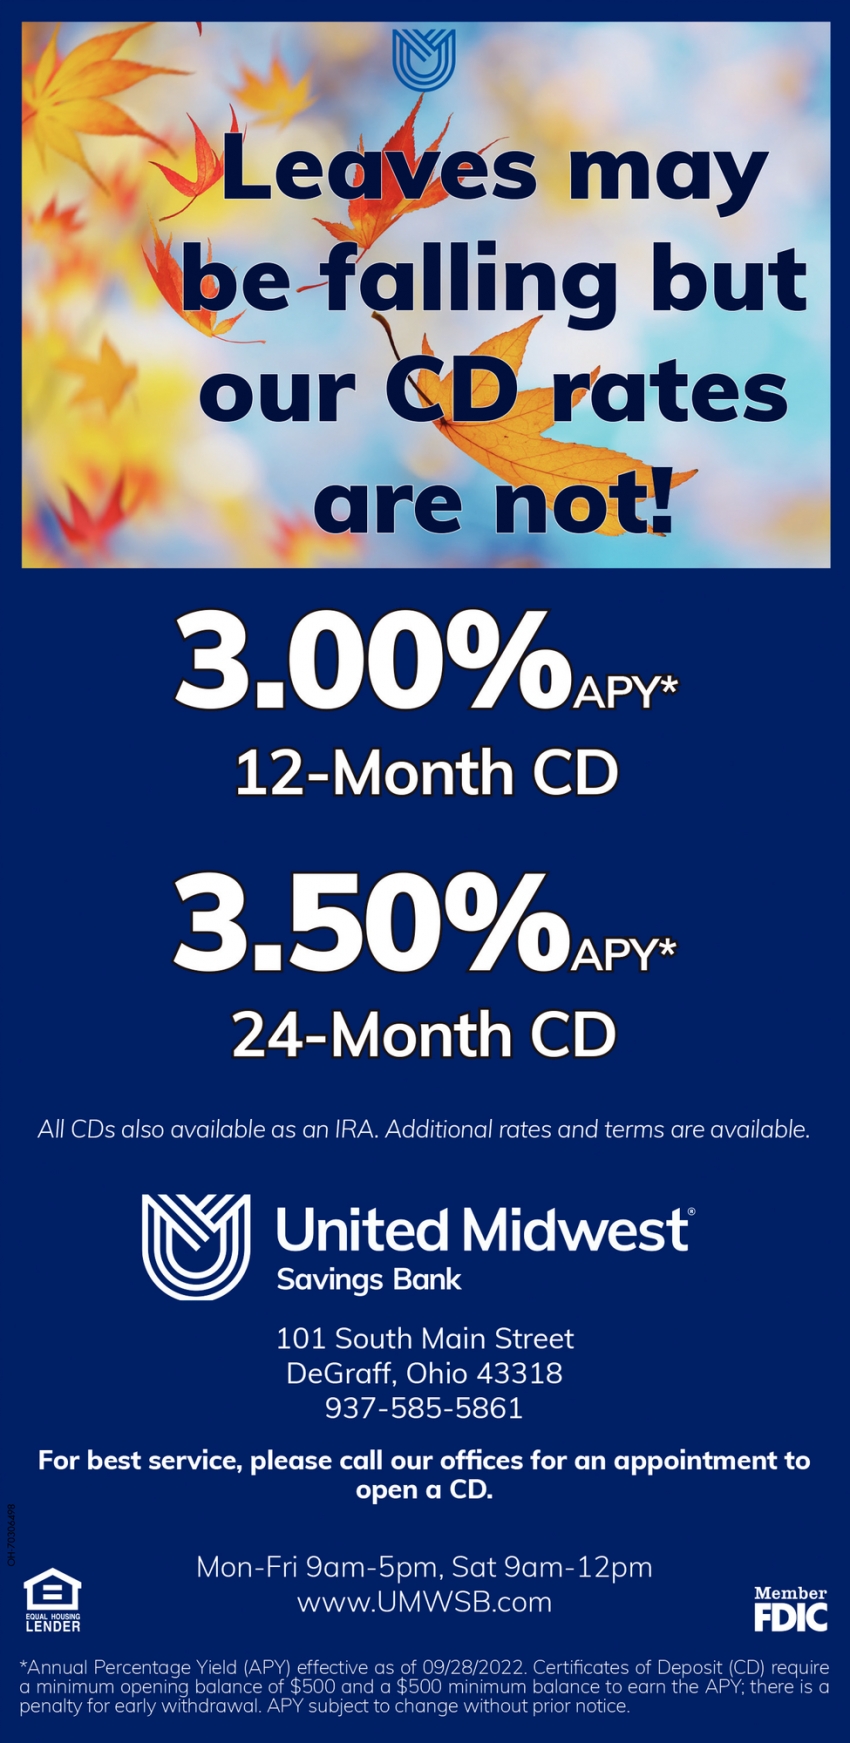 Leaves May Be Falling But Our CD Rates Are Not